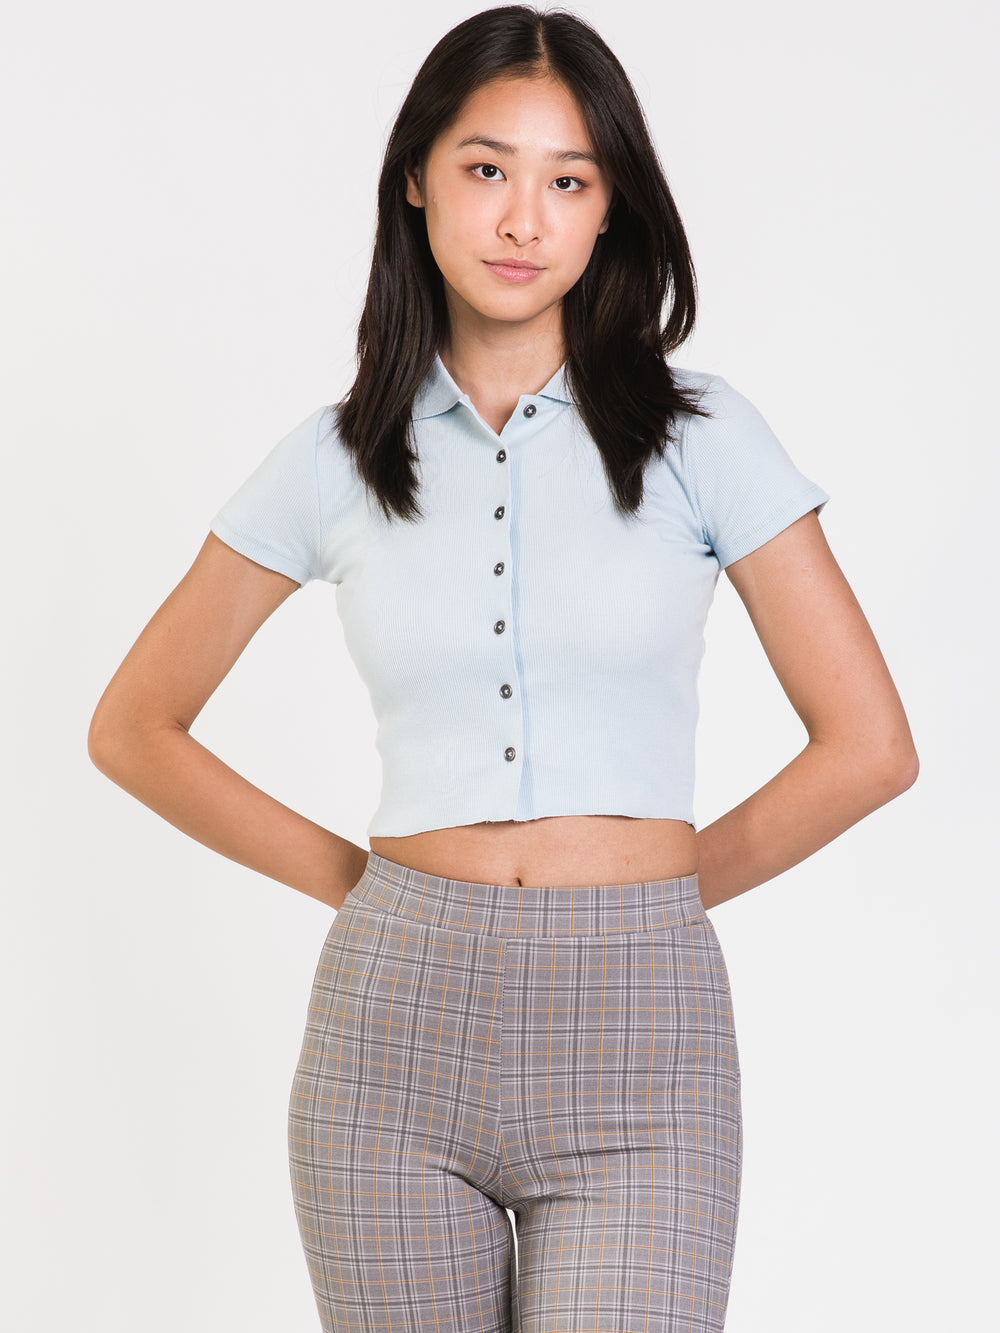 HARLOW NAOMI BUTTON UP - CLEARANCE